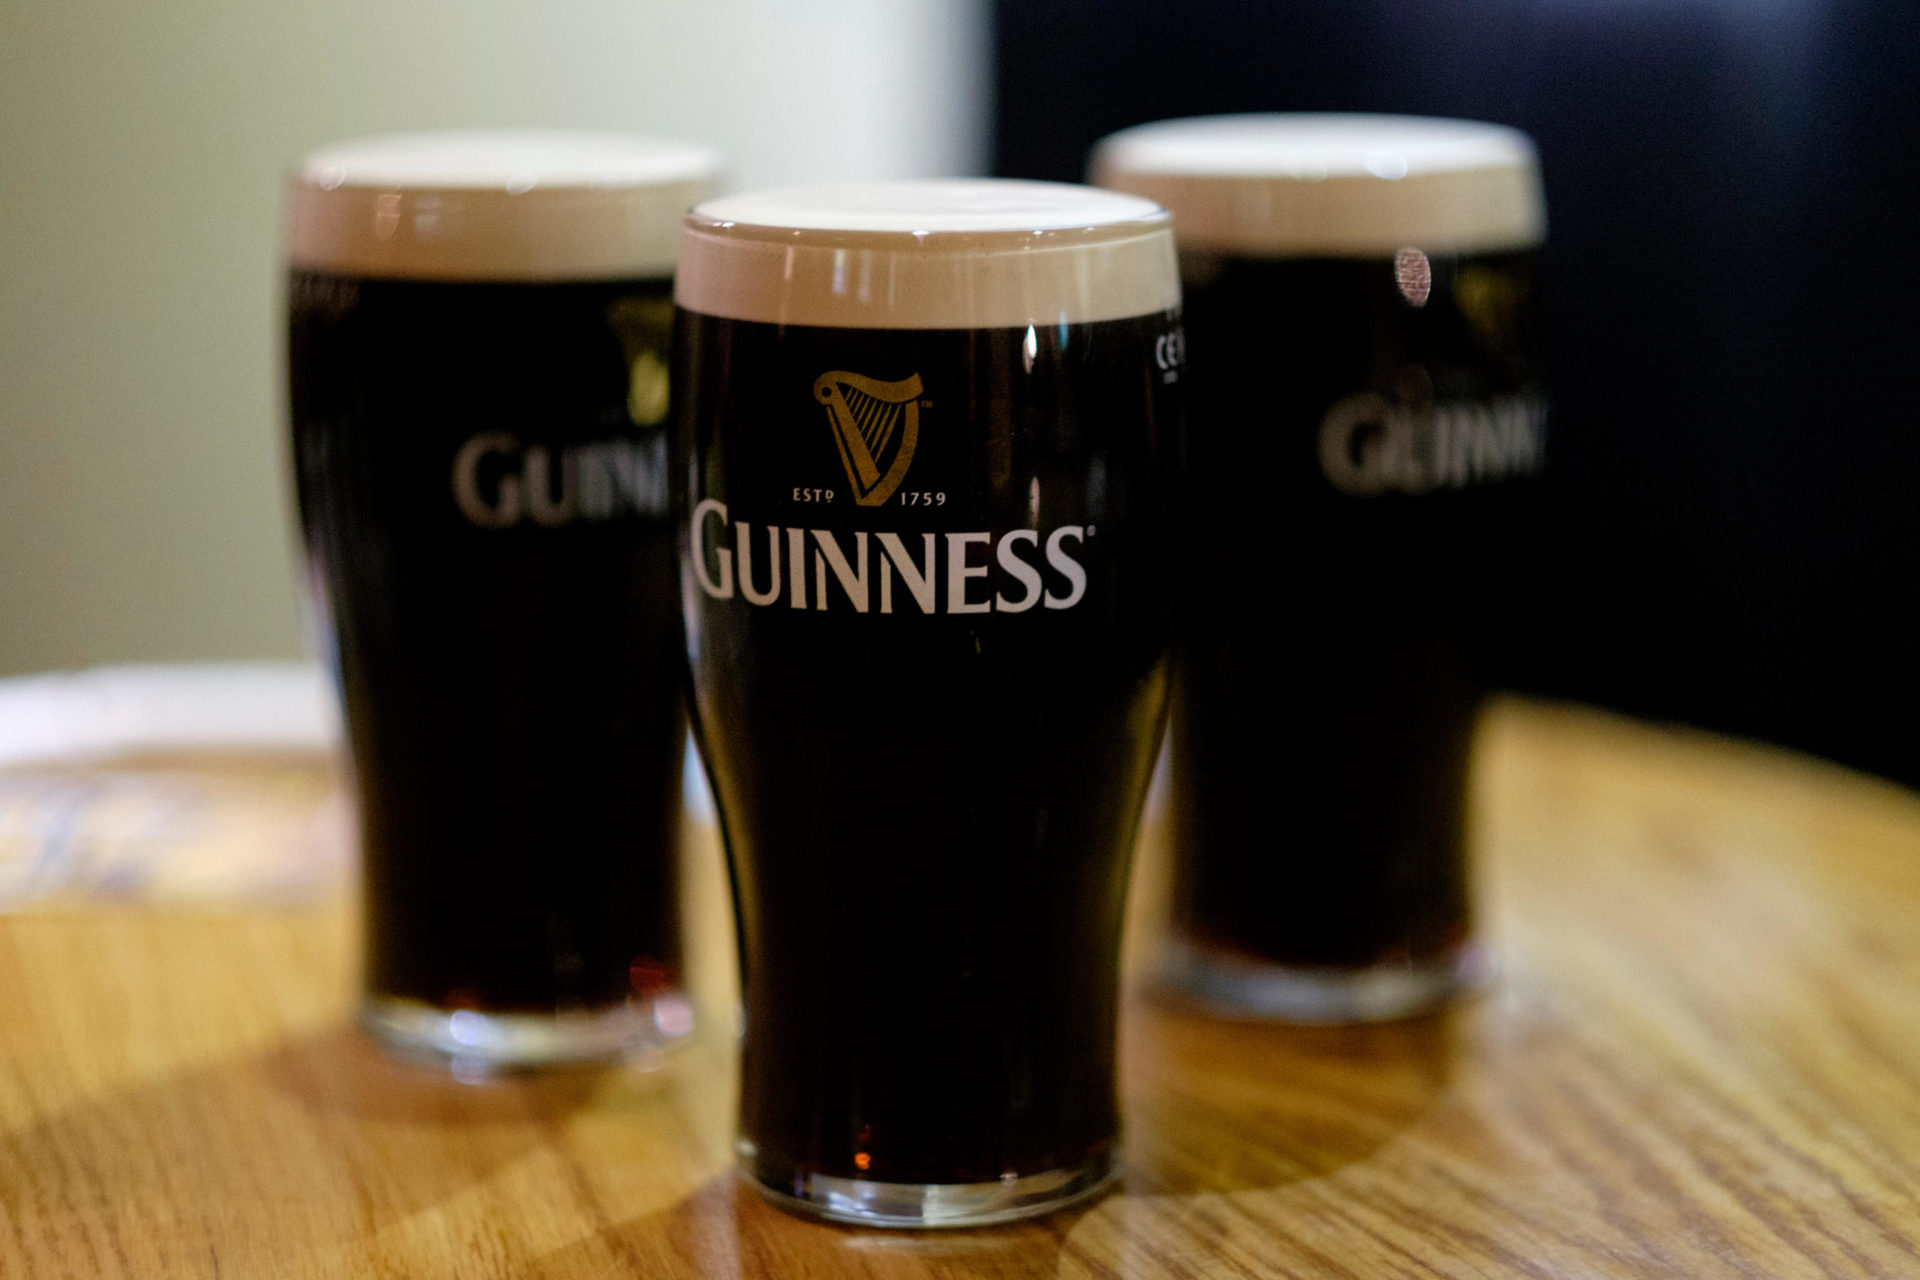 Three pints of Guinness,